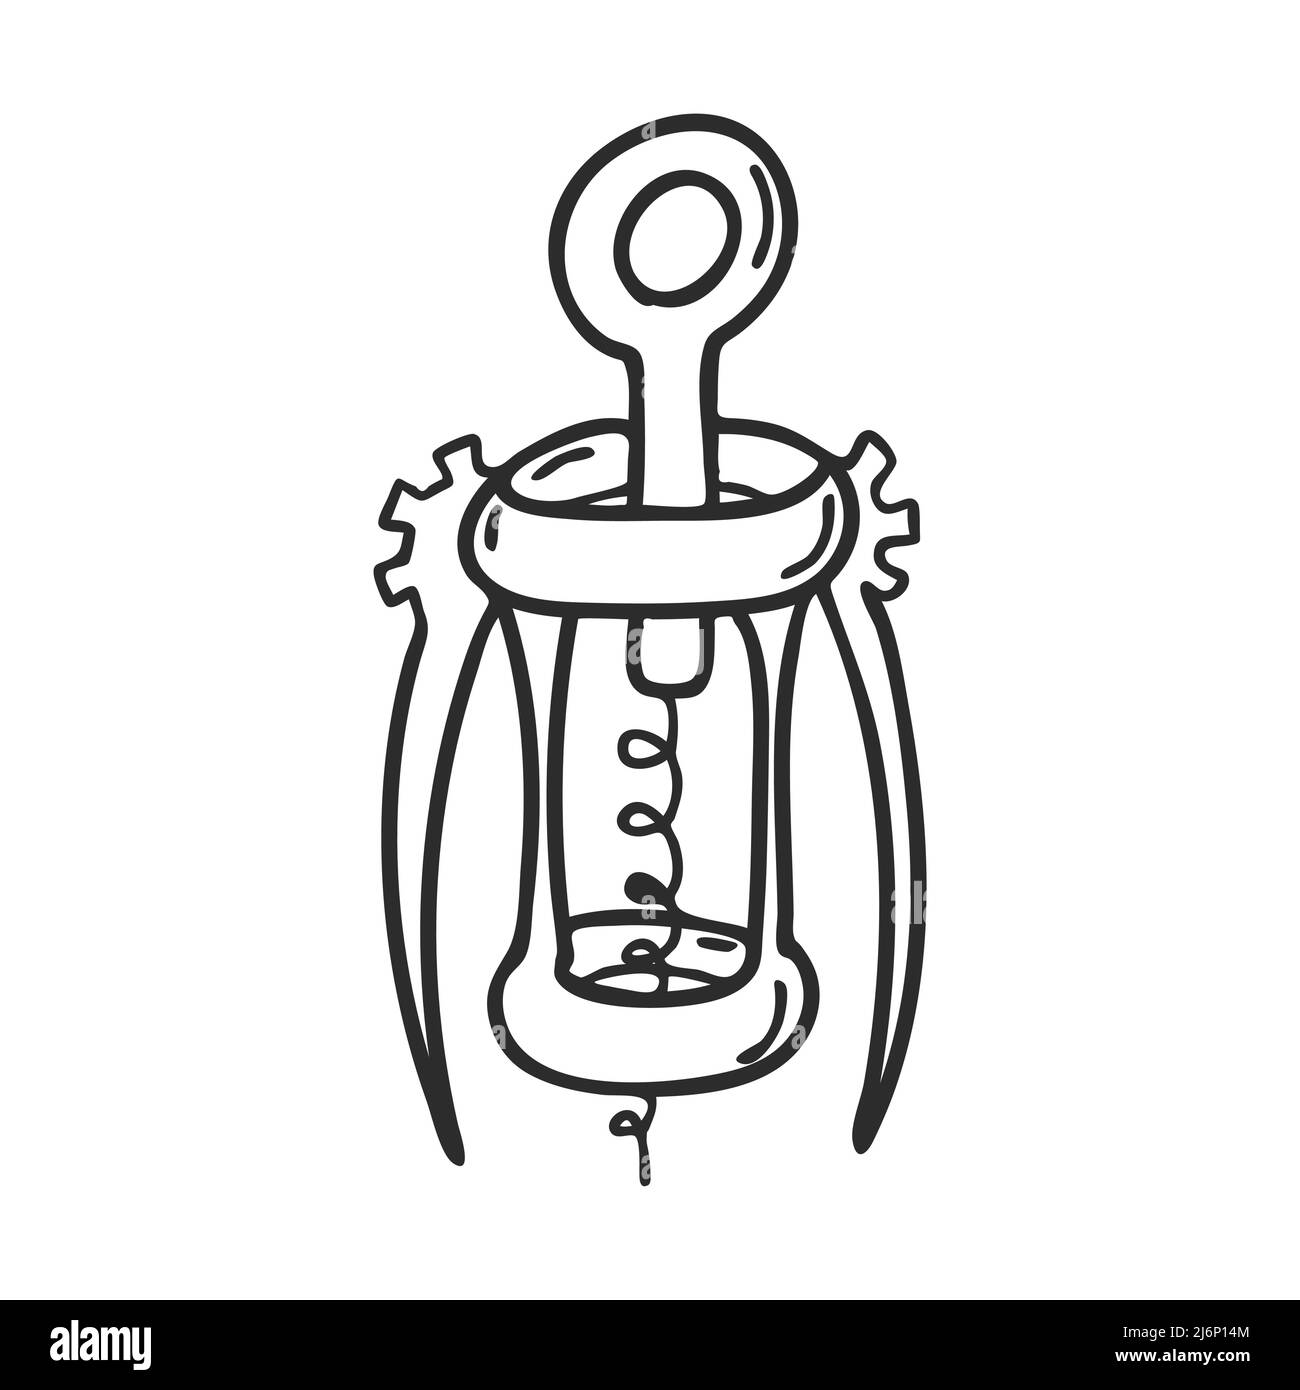 Corkscrew with handles.Tableware. Kitchen accessories, cooking utensils. Design element for menu design, recipes, and food packaging. Hand drawn and i Stock Vector